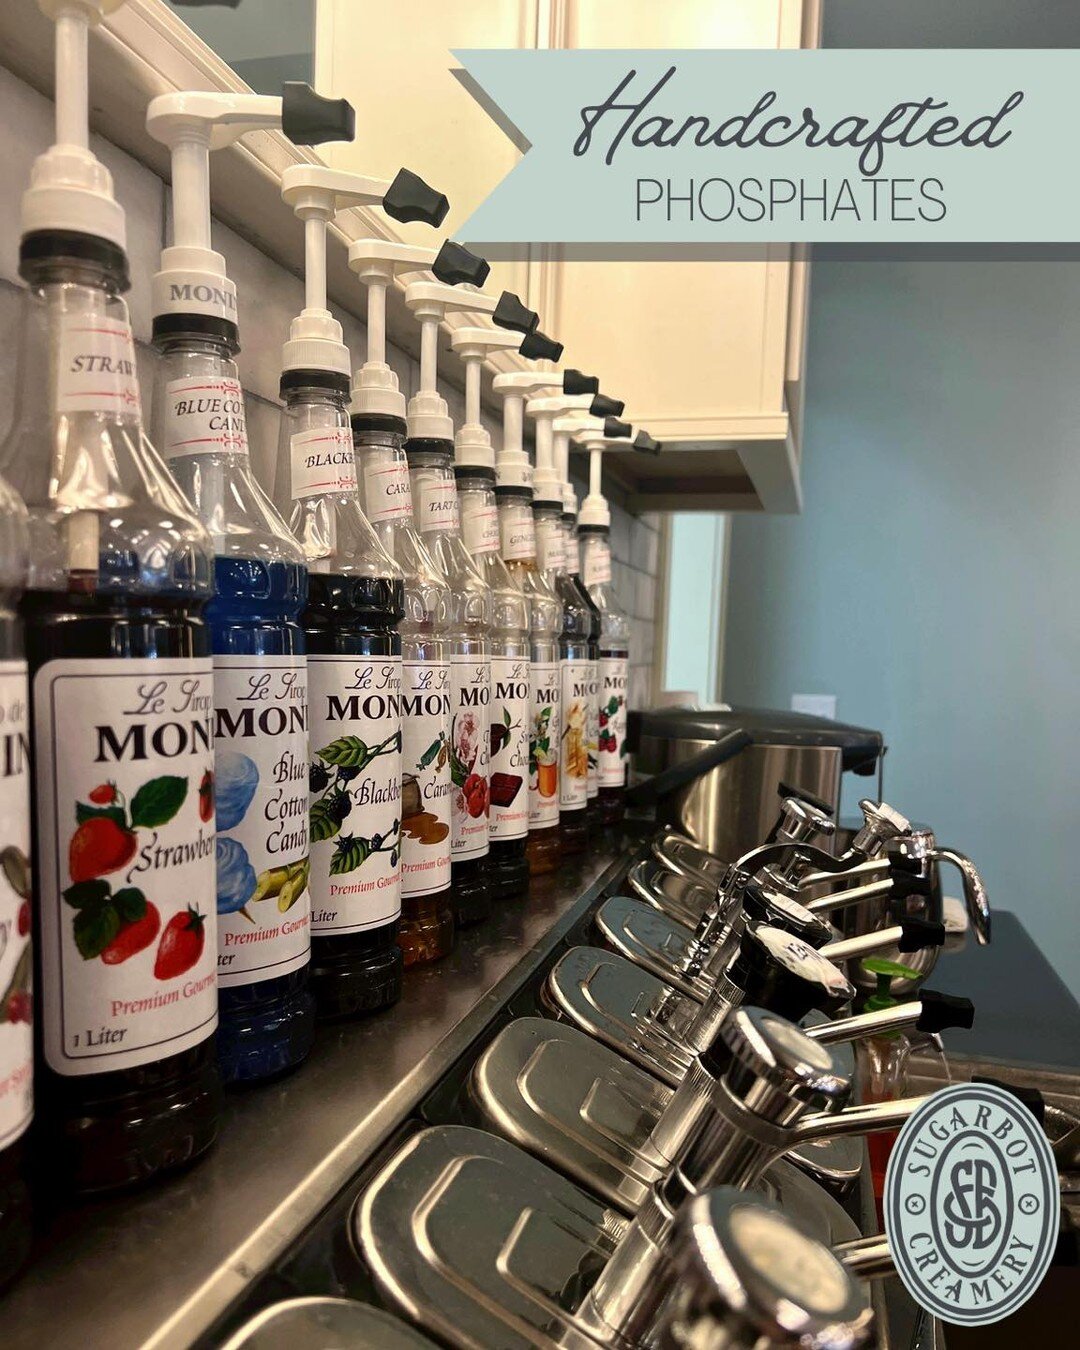 Pick a flavor or two and we&rsquo;ll mix up a refreshing phosphate that pairs perfectly with a relaxing stroll down Main Street. 🥤🛍

#creamery #sugarbotcreamery #discoverstc #mainstreet #mainstreetstcharlesmo #phosphate #mainstreetstcharles #sodash